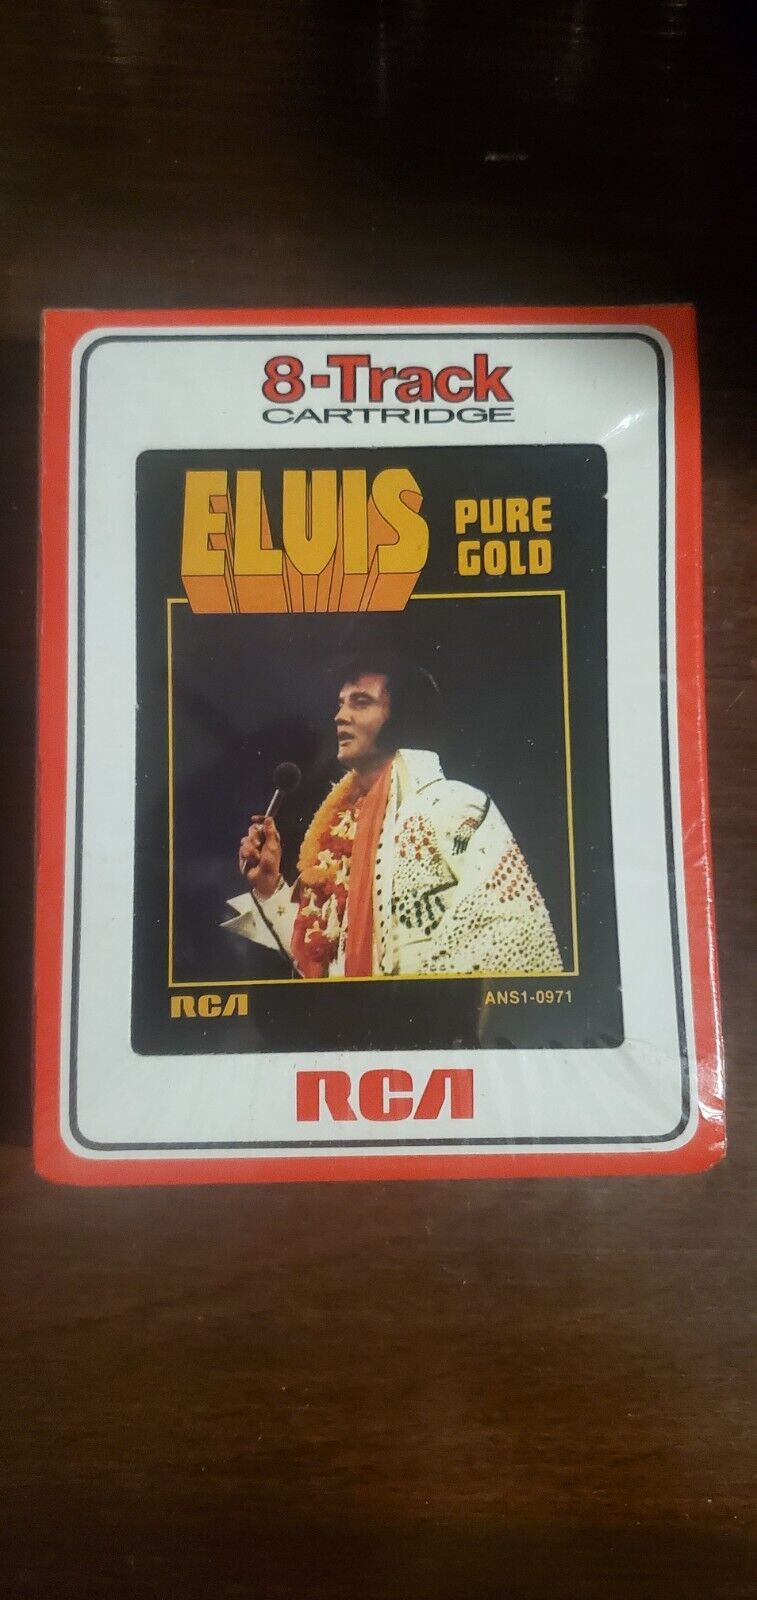 ELVIS PRESLEY  PURE GOLD  8-Track Tape  New  SEALED  RARE